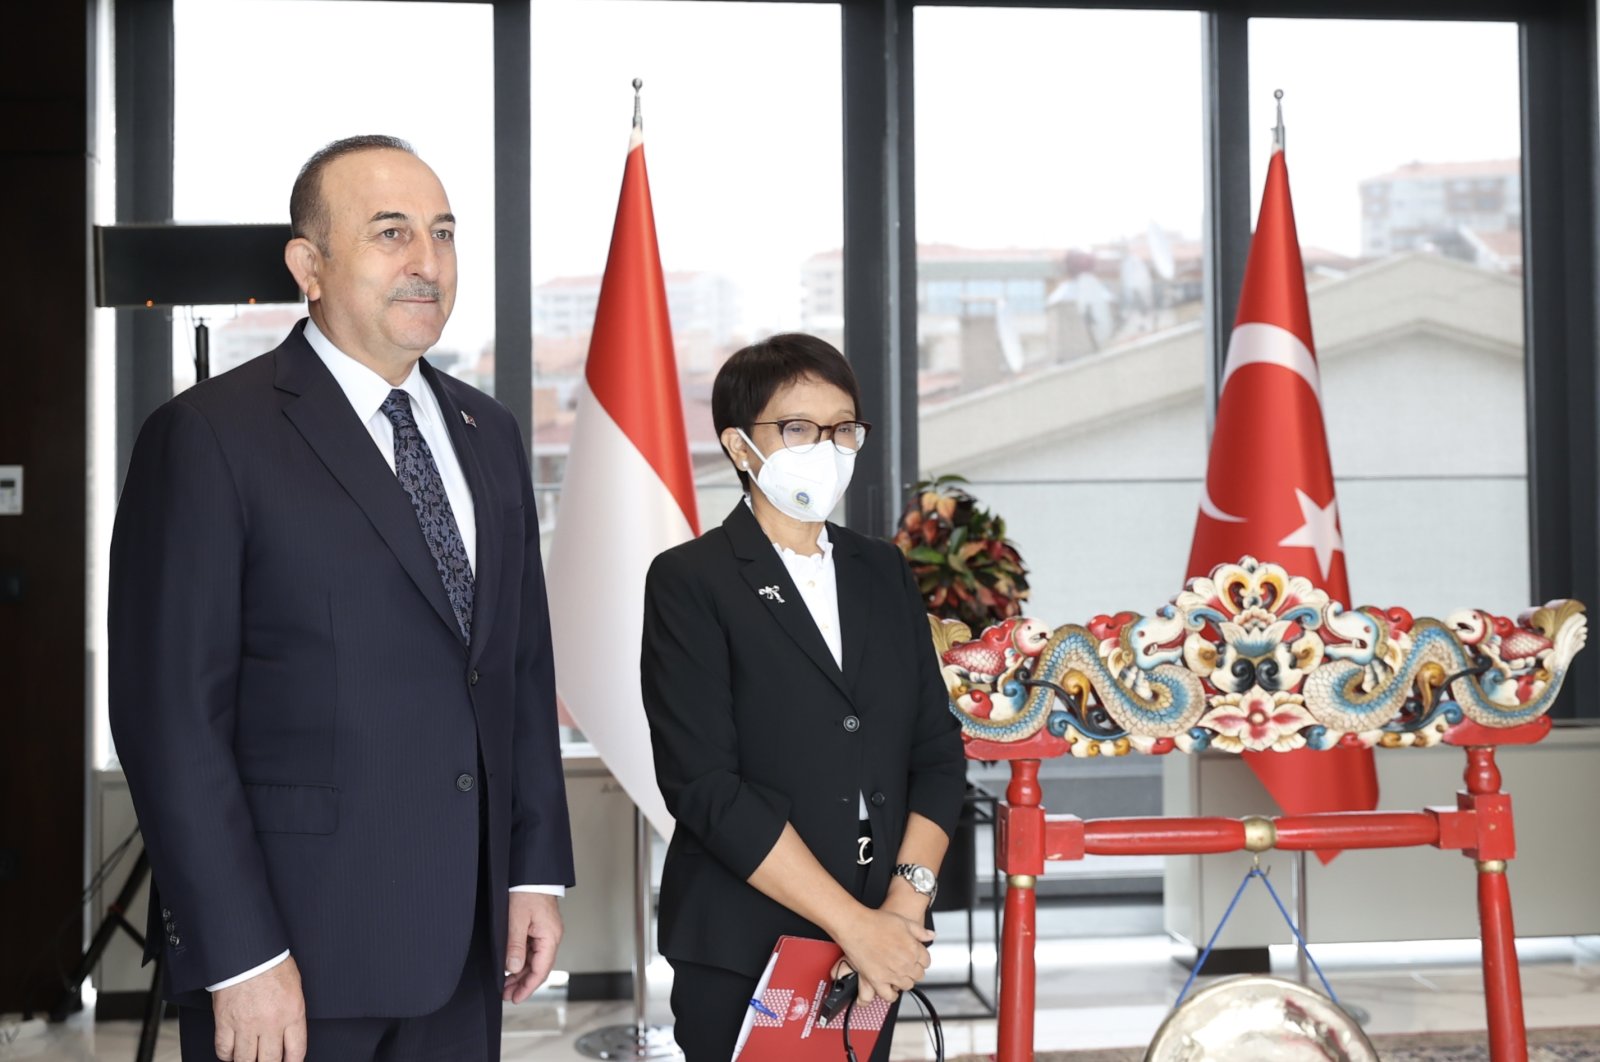 Foreign Minister Mevlüt Çavuşoğlu and his Indonesian counterpart Retno Marsudi pose during the inauguration ceremony of the new Indonesian Embassy building in Ankara, Turkey, April 22, 2022. (AA Photo)